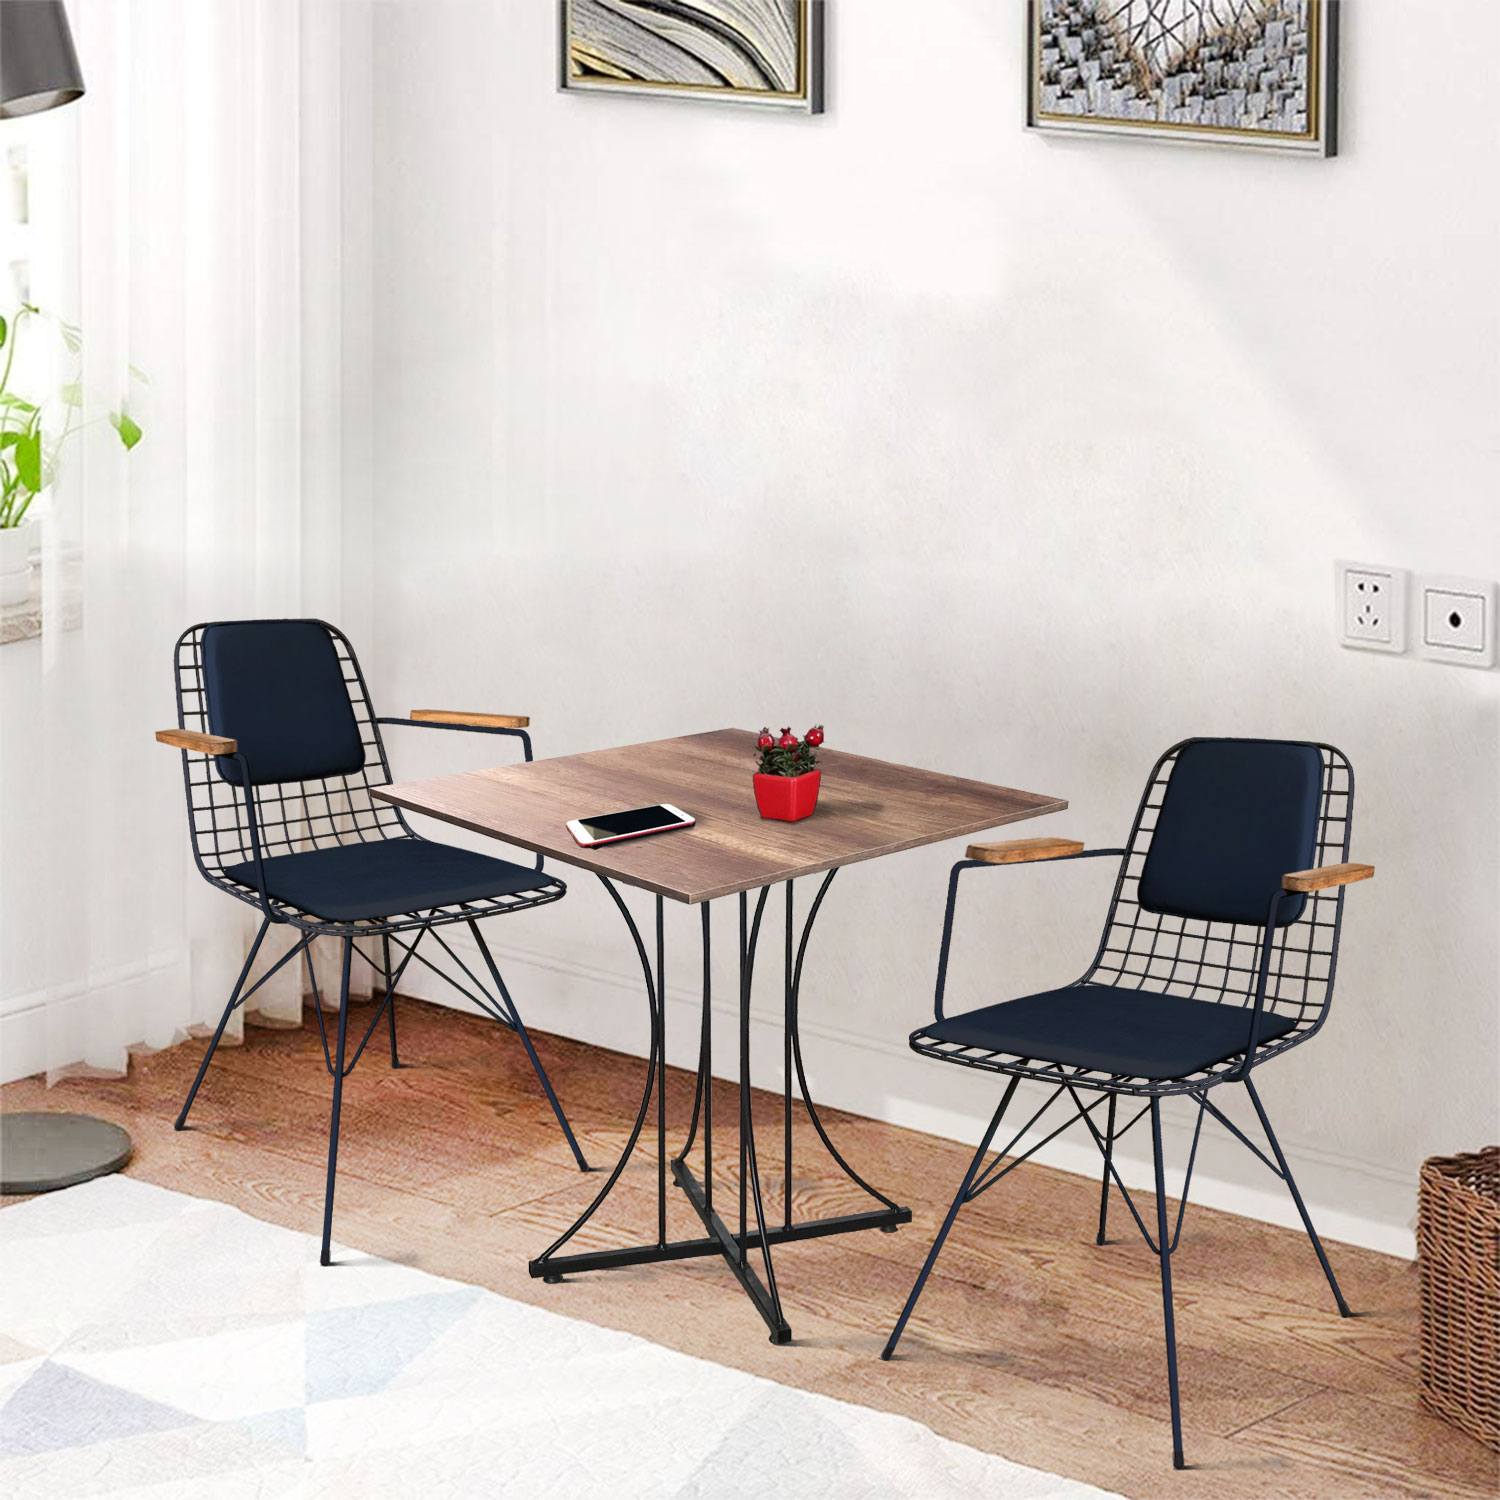 2 Person 70X70 Table Set (Wooden Patterned) + 2 Chairs with Armrests